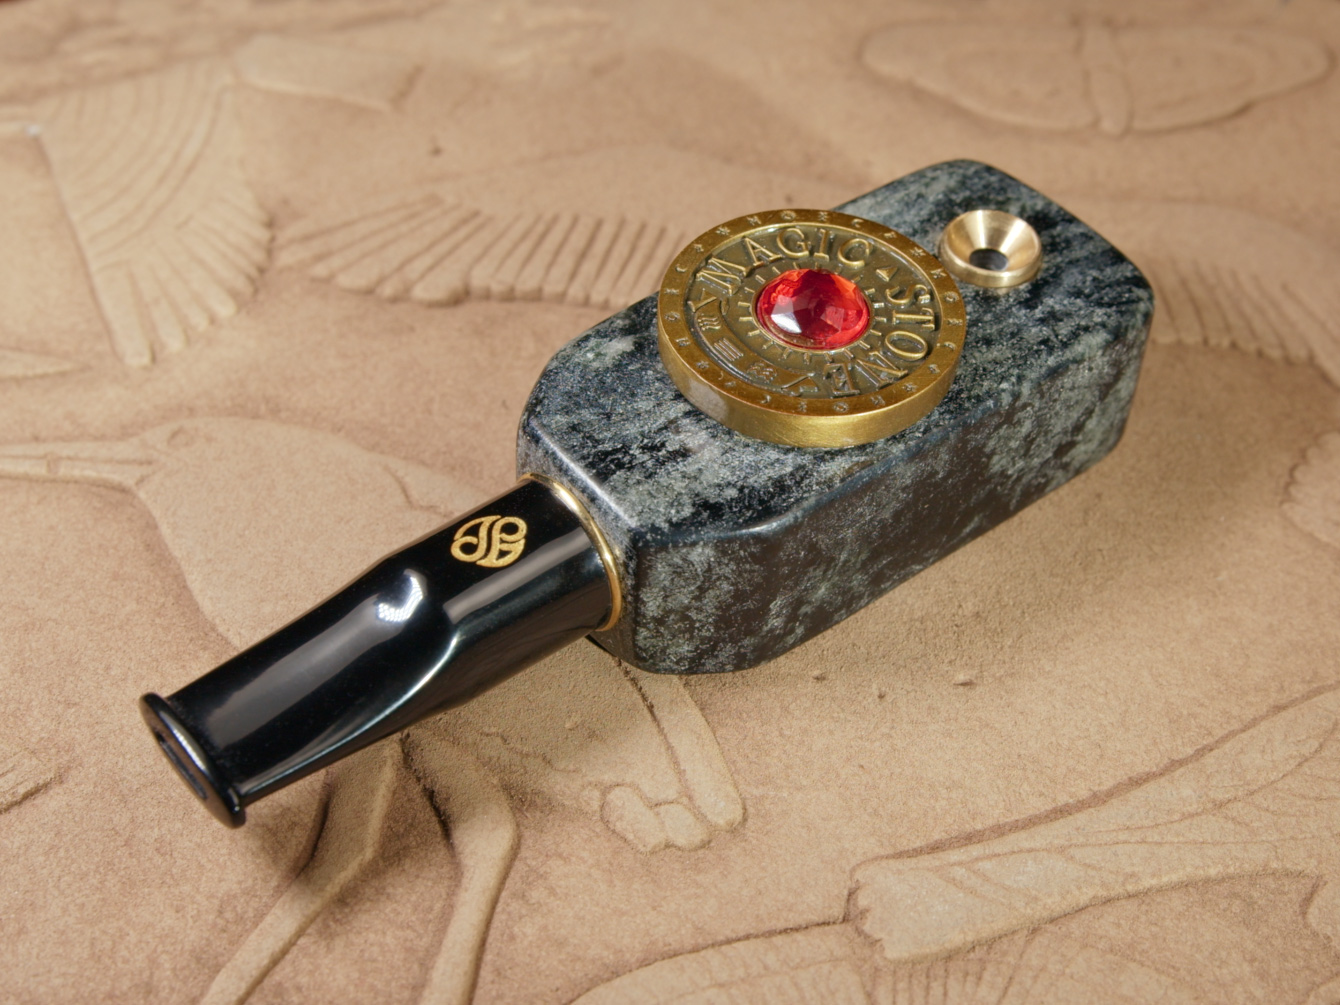 MagicStone Alchemy heat-don't-burn cannabis instrument soapstone vaporizer with custom-minted gemstone gold coin cap and removable acrylic mouthpiece